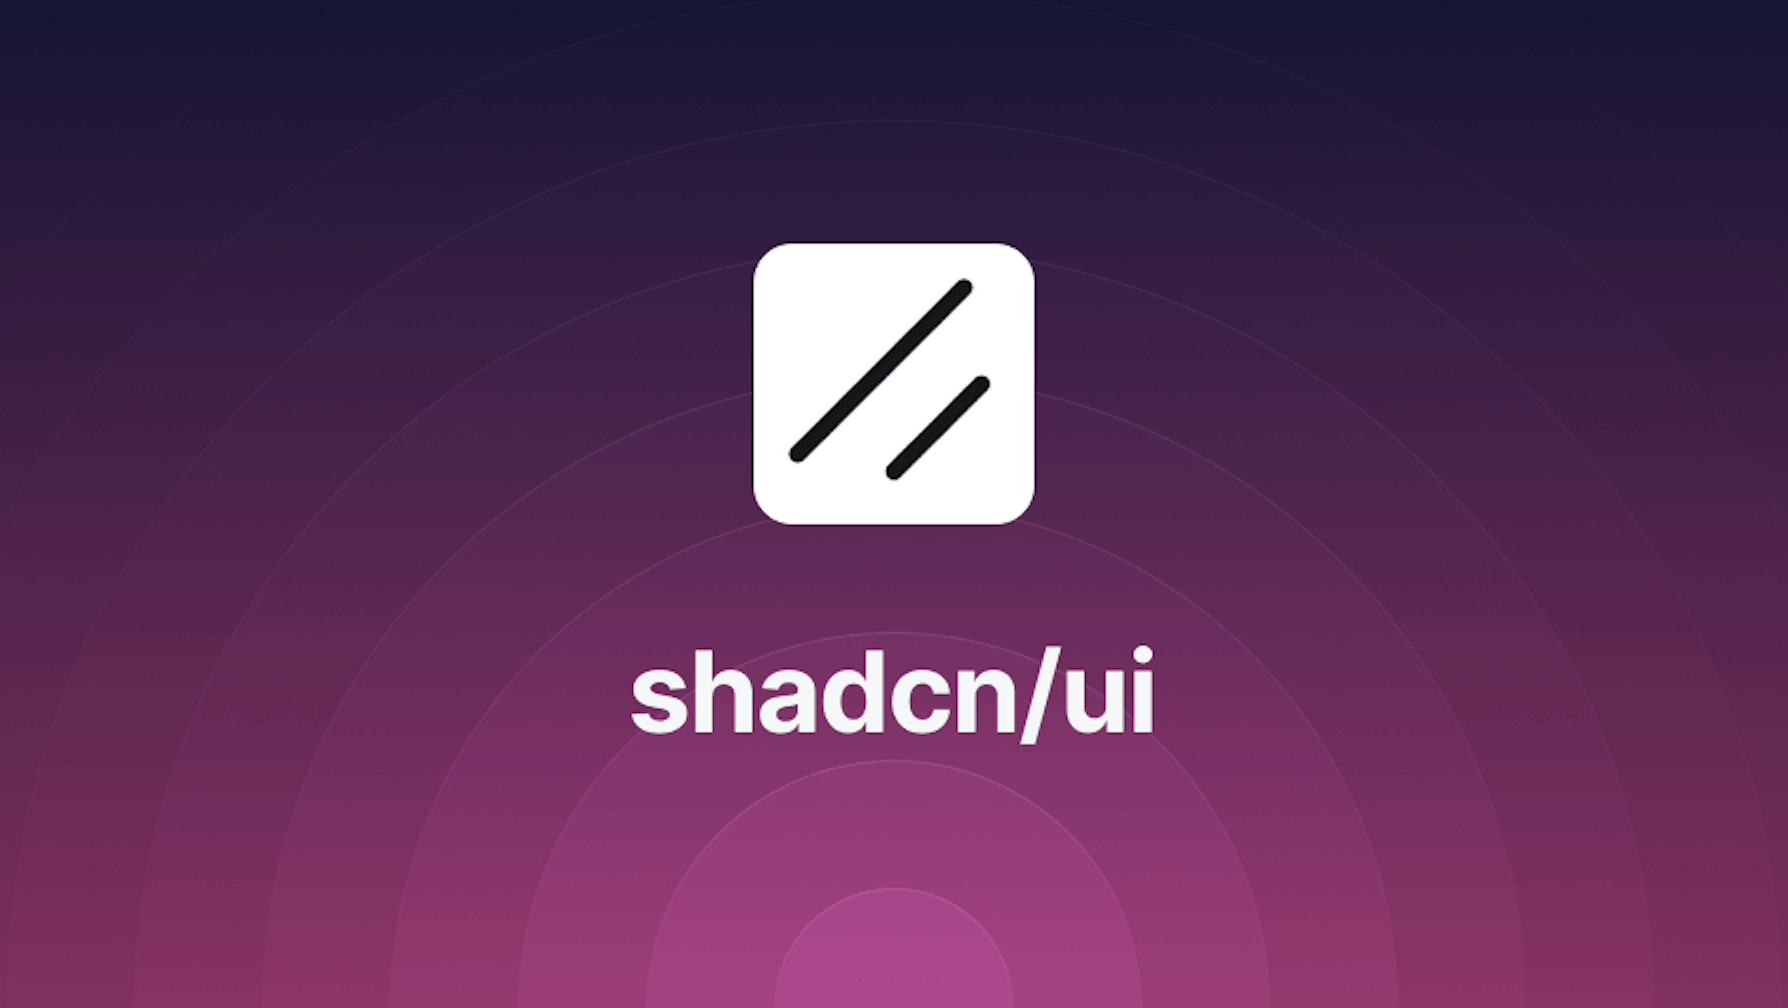 Building a CRUD app with Shadcn UI and Refine